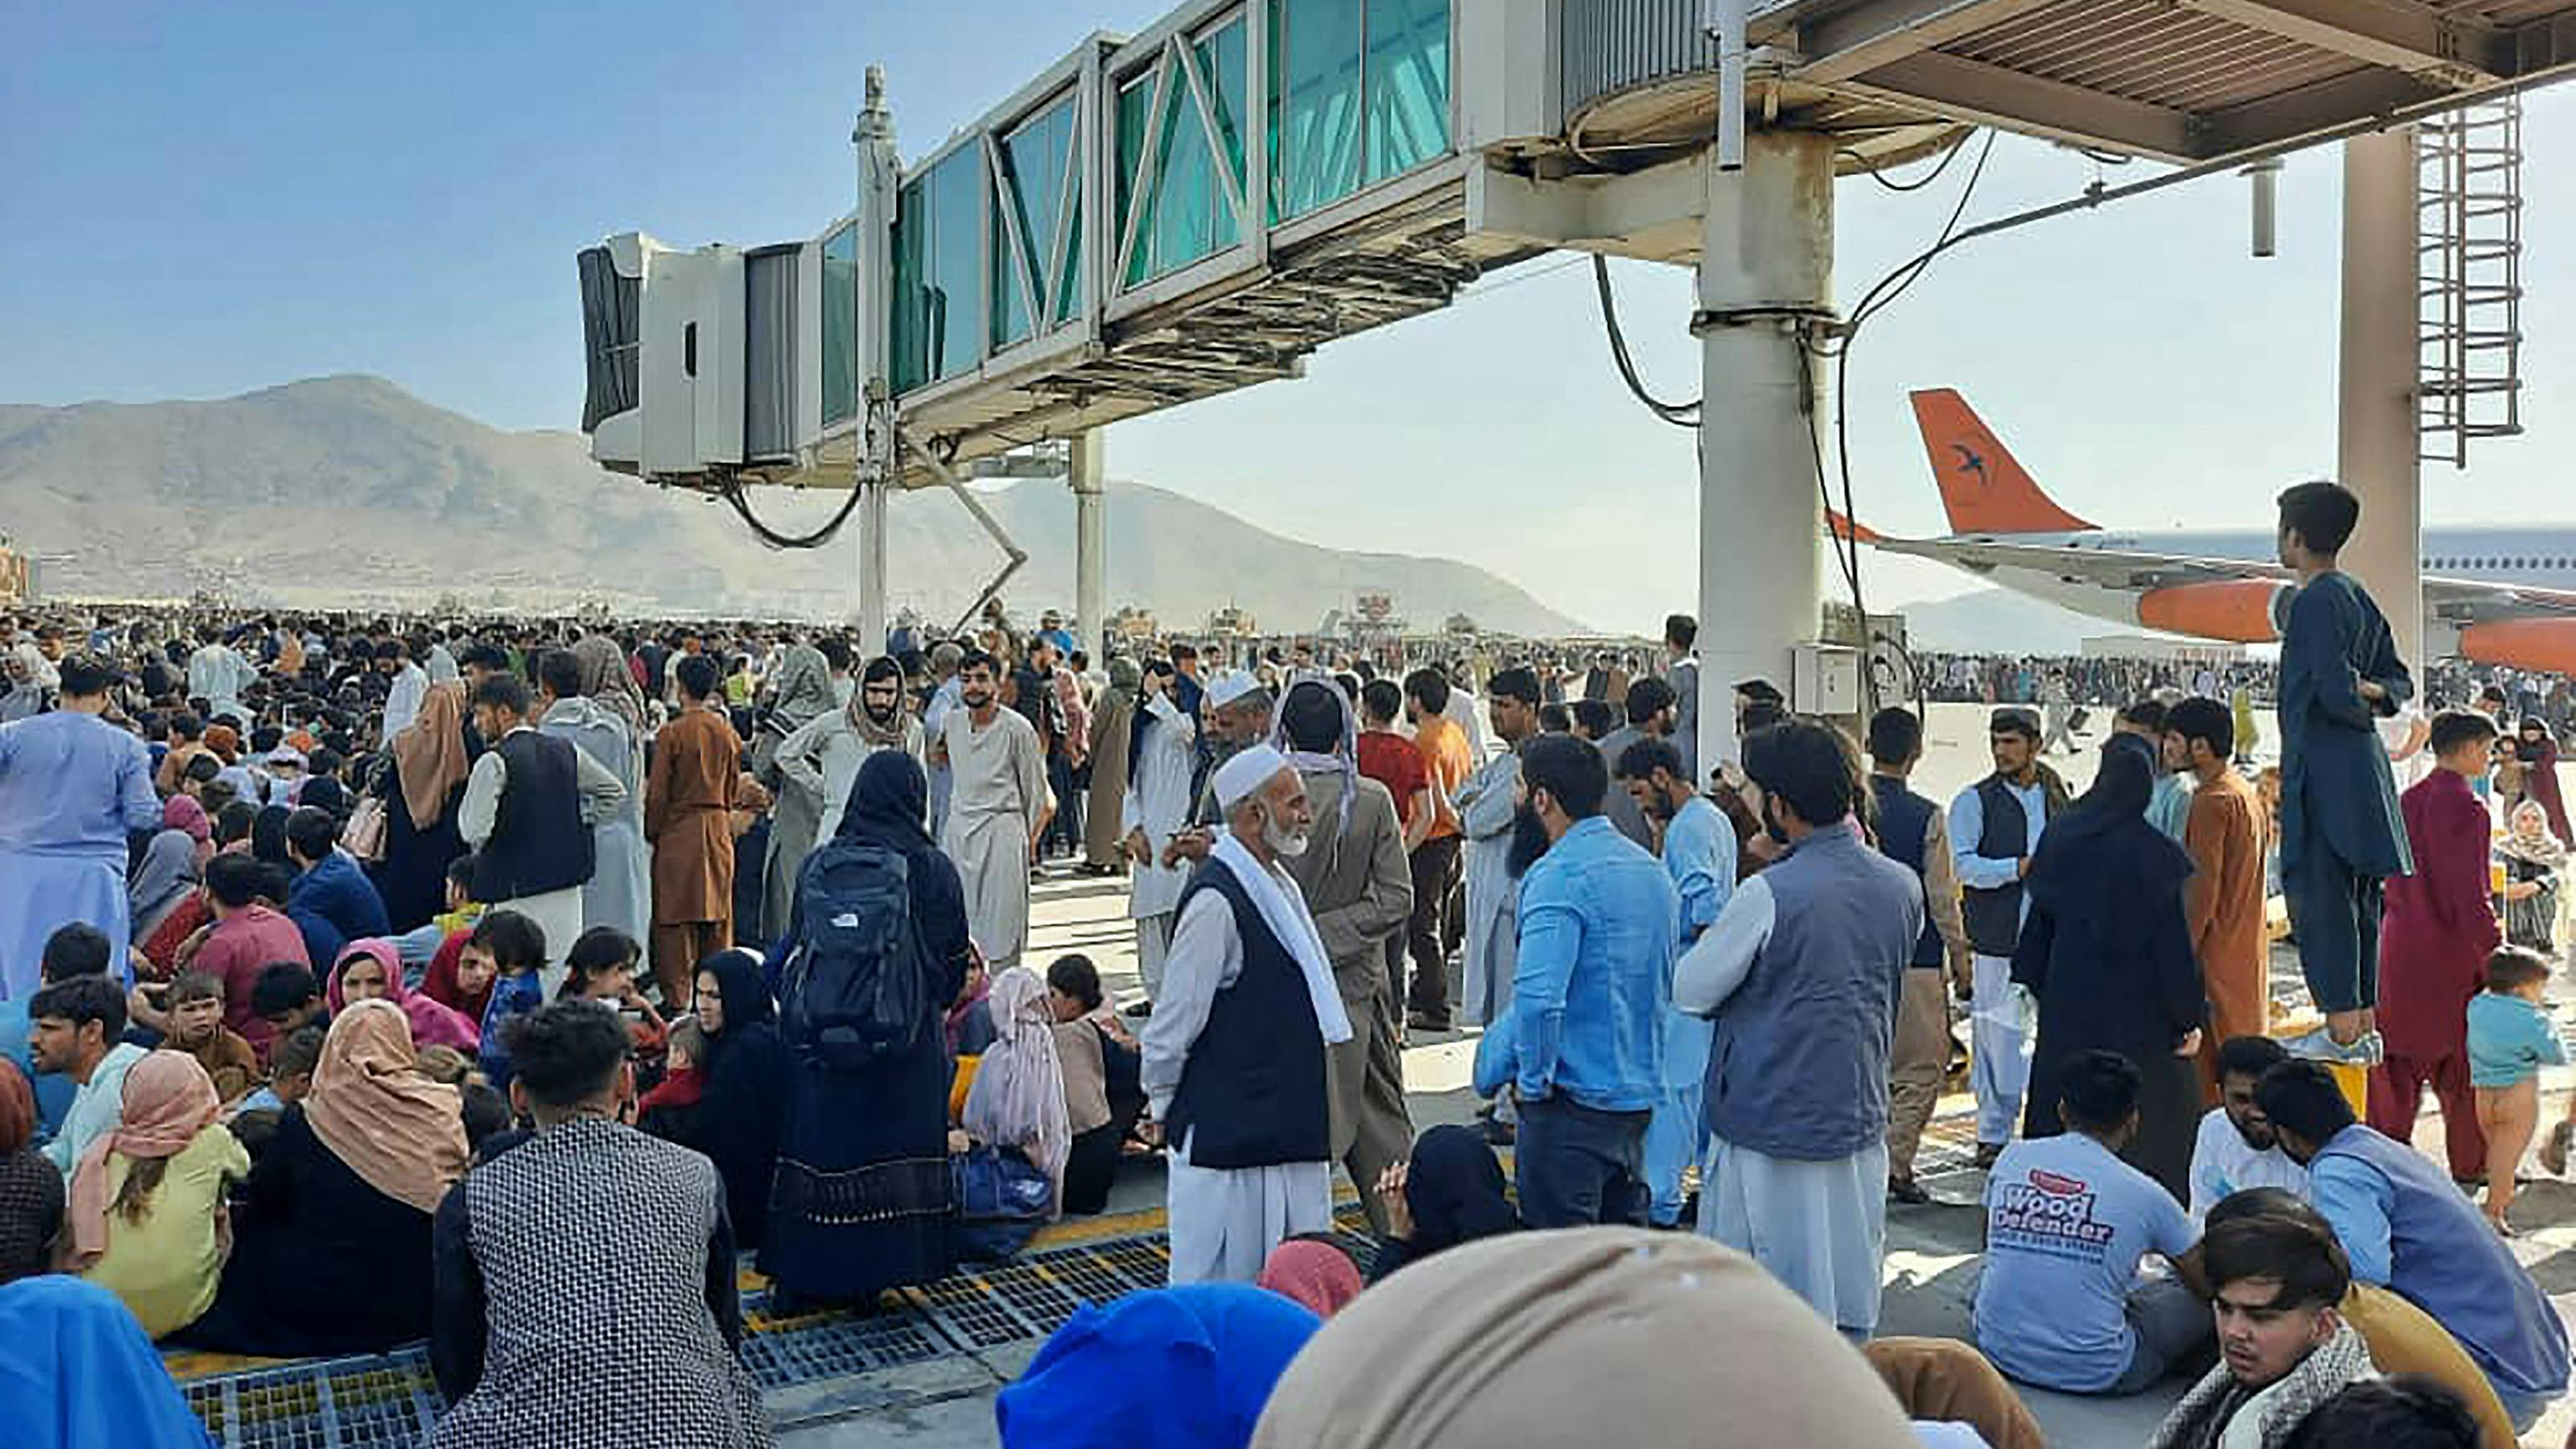 Afghans crowd at the tarmac of the Kabul airport on August 16, 2021, to flee the country as the Taliban were in control of Afghanistan after President Ashraf Ghani fled the country and conceded the insurgents had won the 20-year war. 